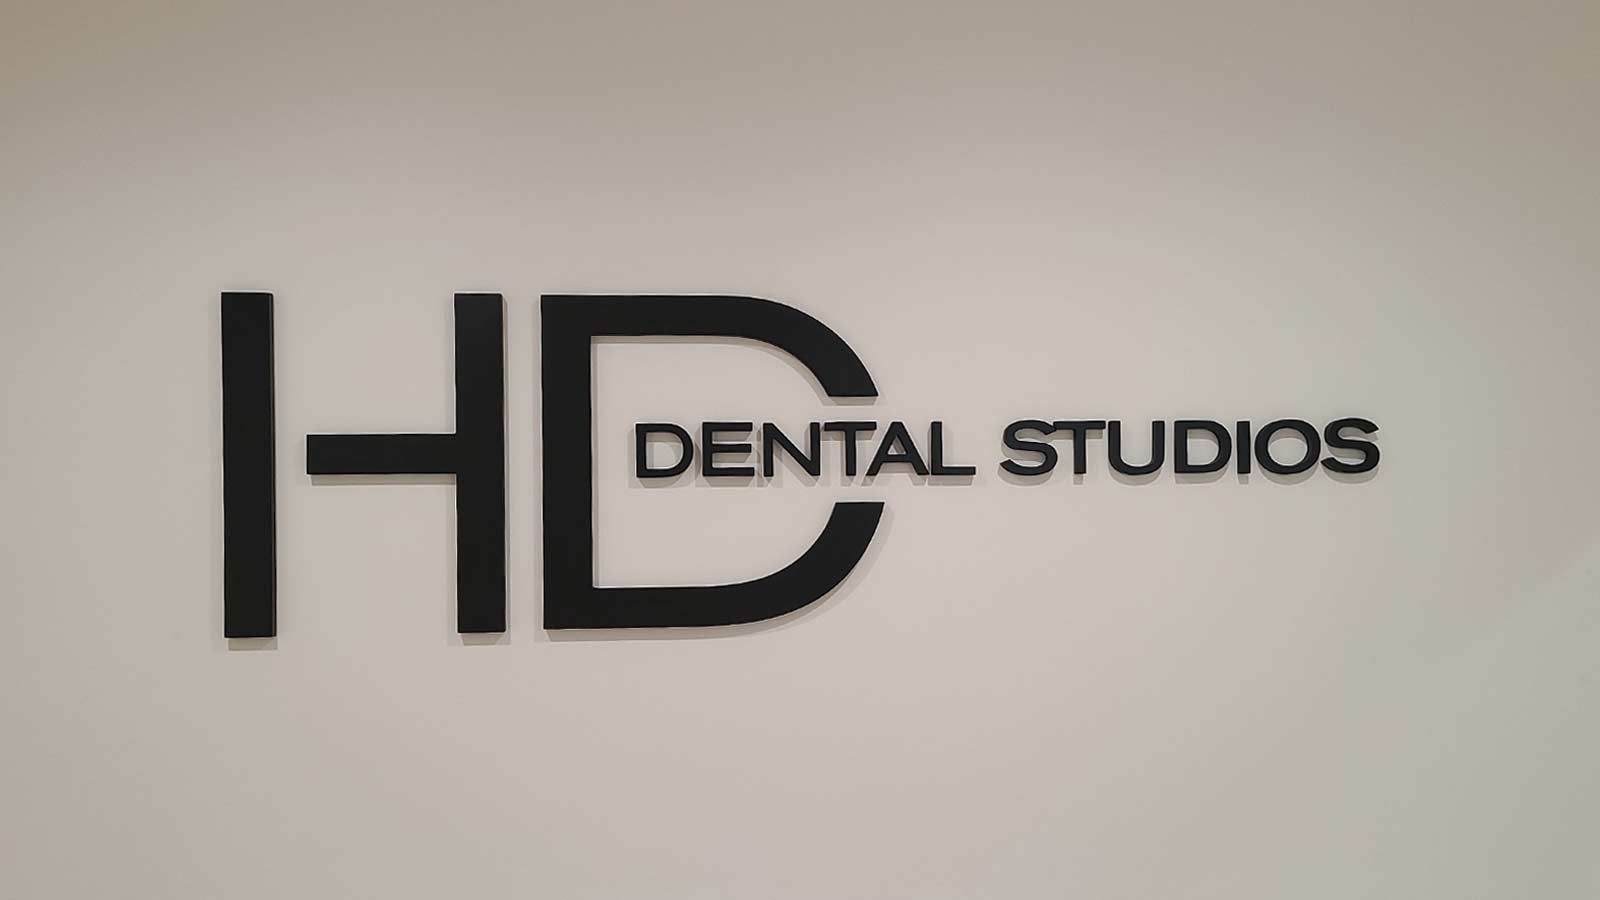 HD Dental Studios interior sign attached to the wall